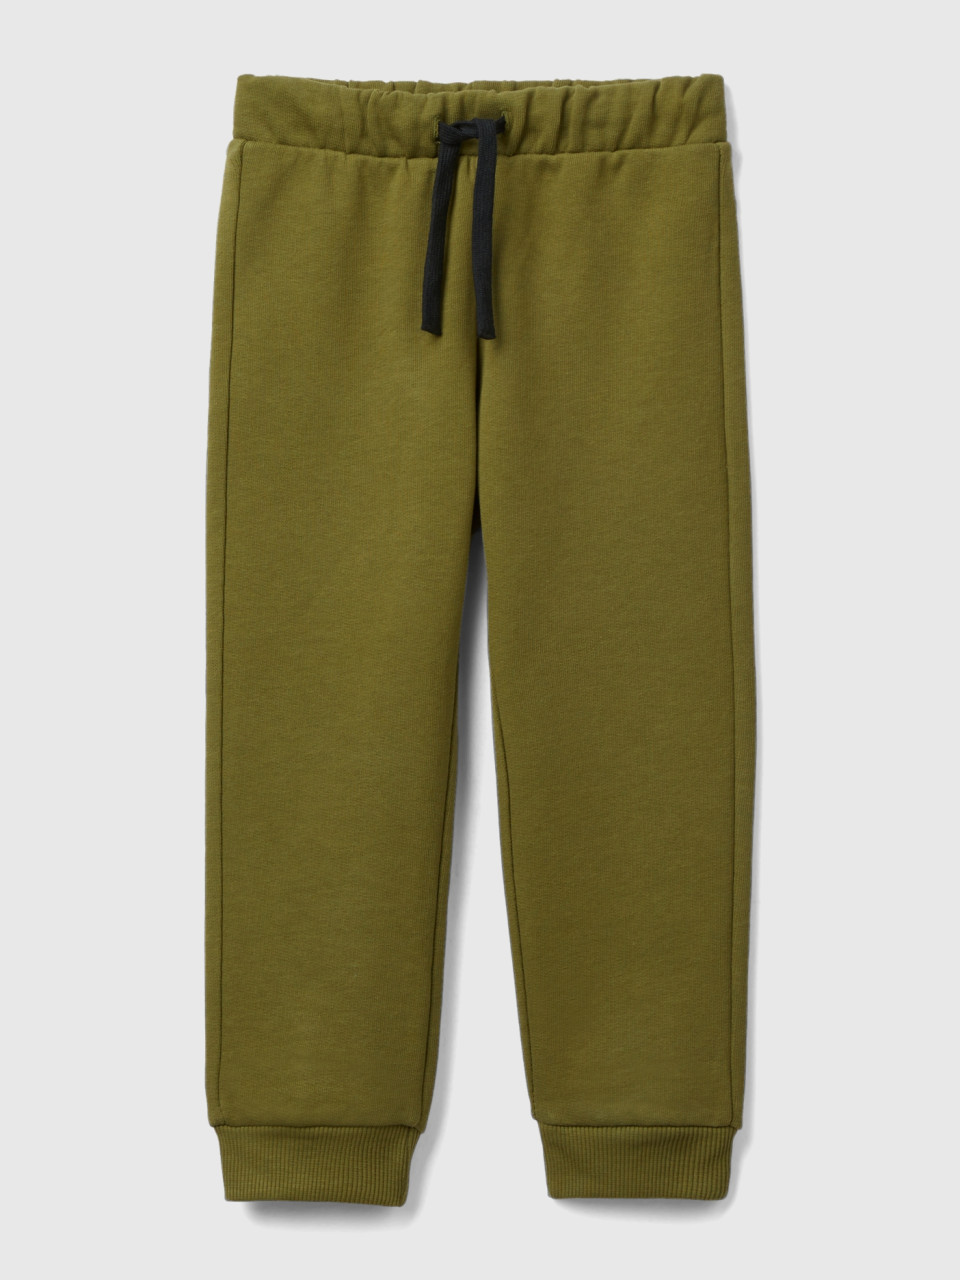 Benetton, Sweatpants With Pocket, Military Green, Kids